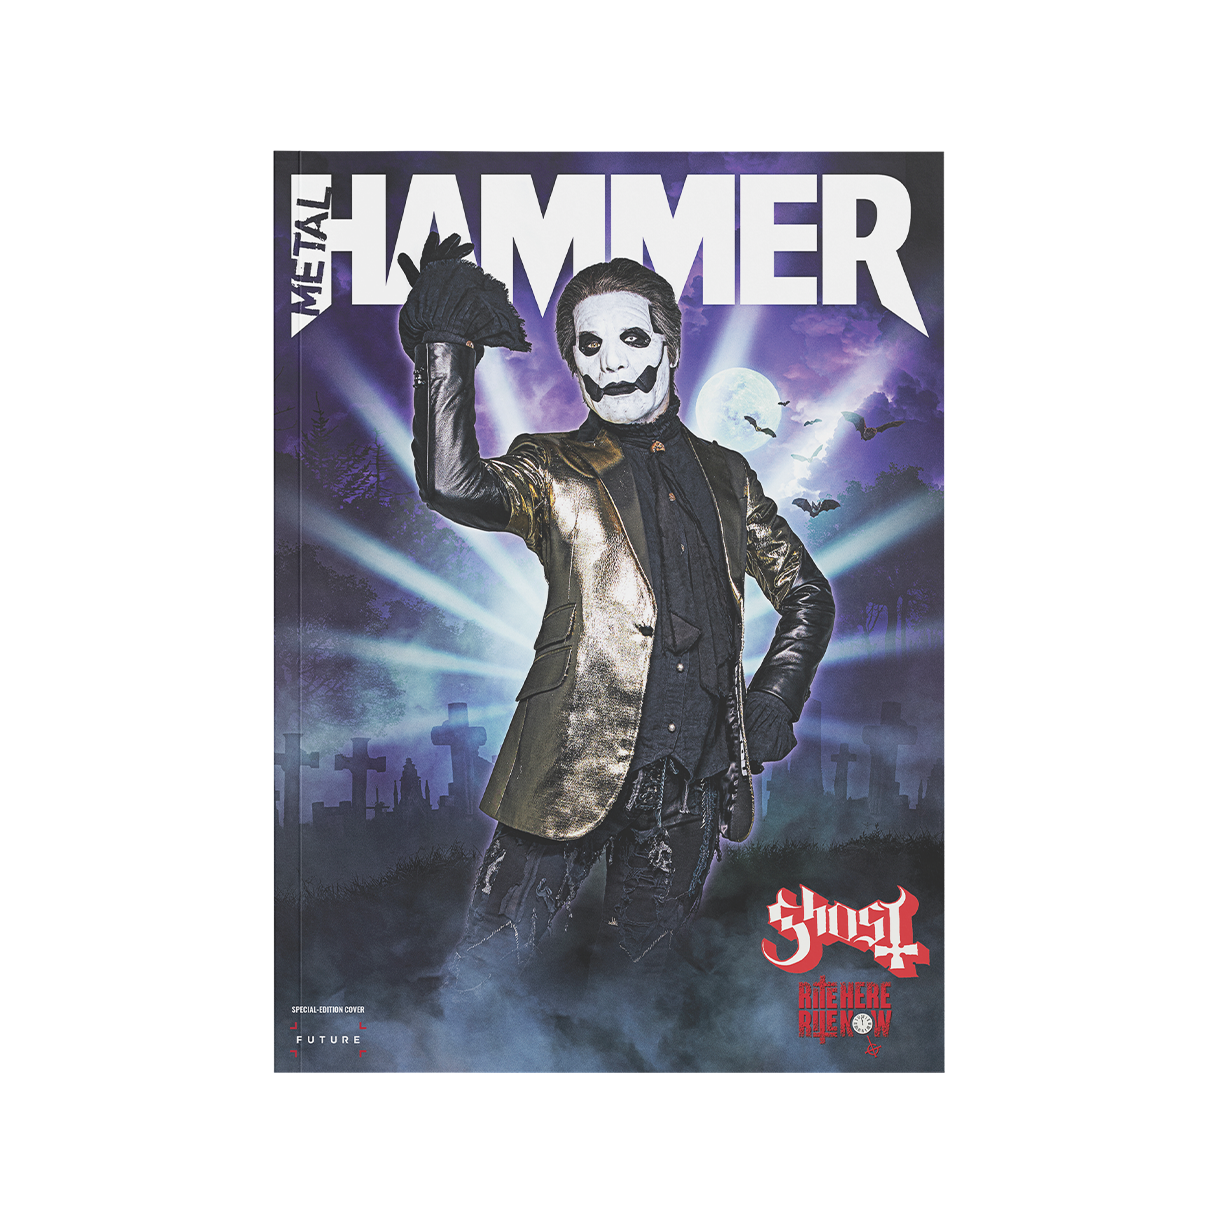 Metal Hammer Issue 389 - Limited-Edition Ghost Magazine Cover + T-Shirt Bundle